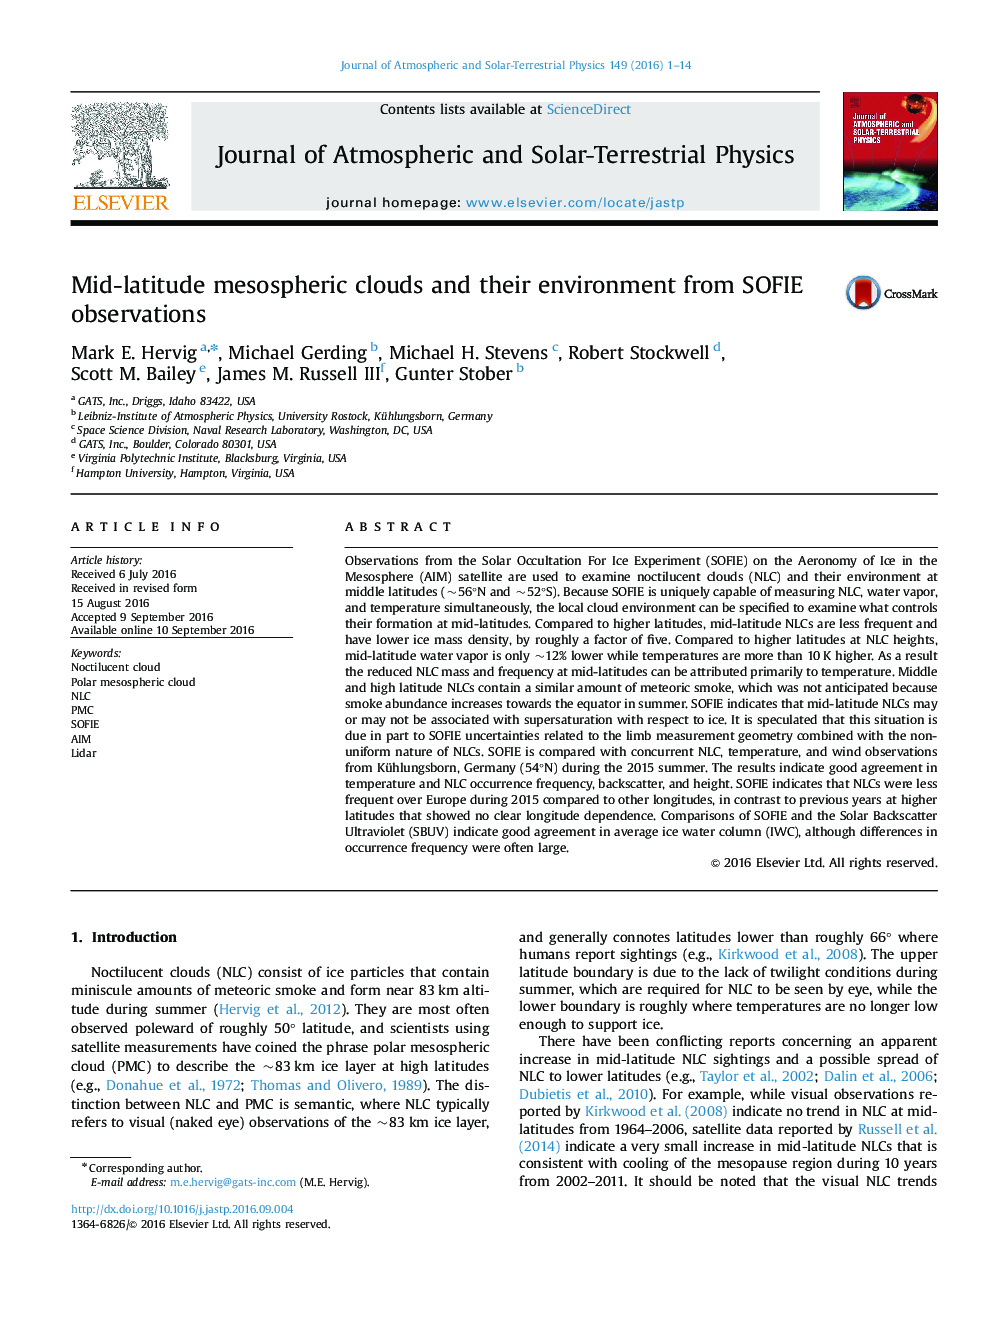 Mid-latitude mesospheric clouds and their environment from SOFIE observations